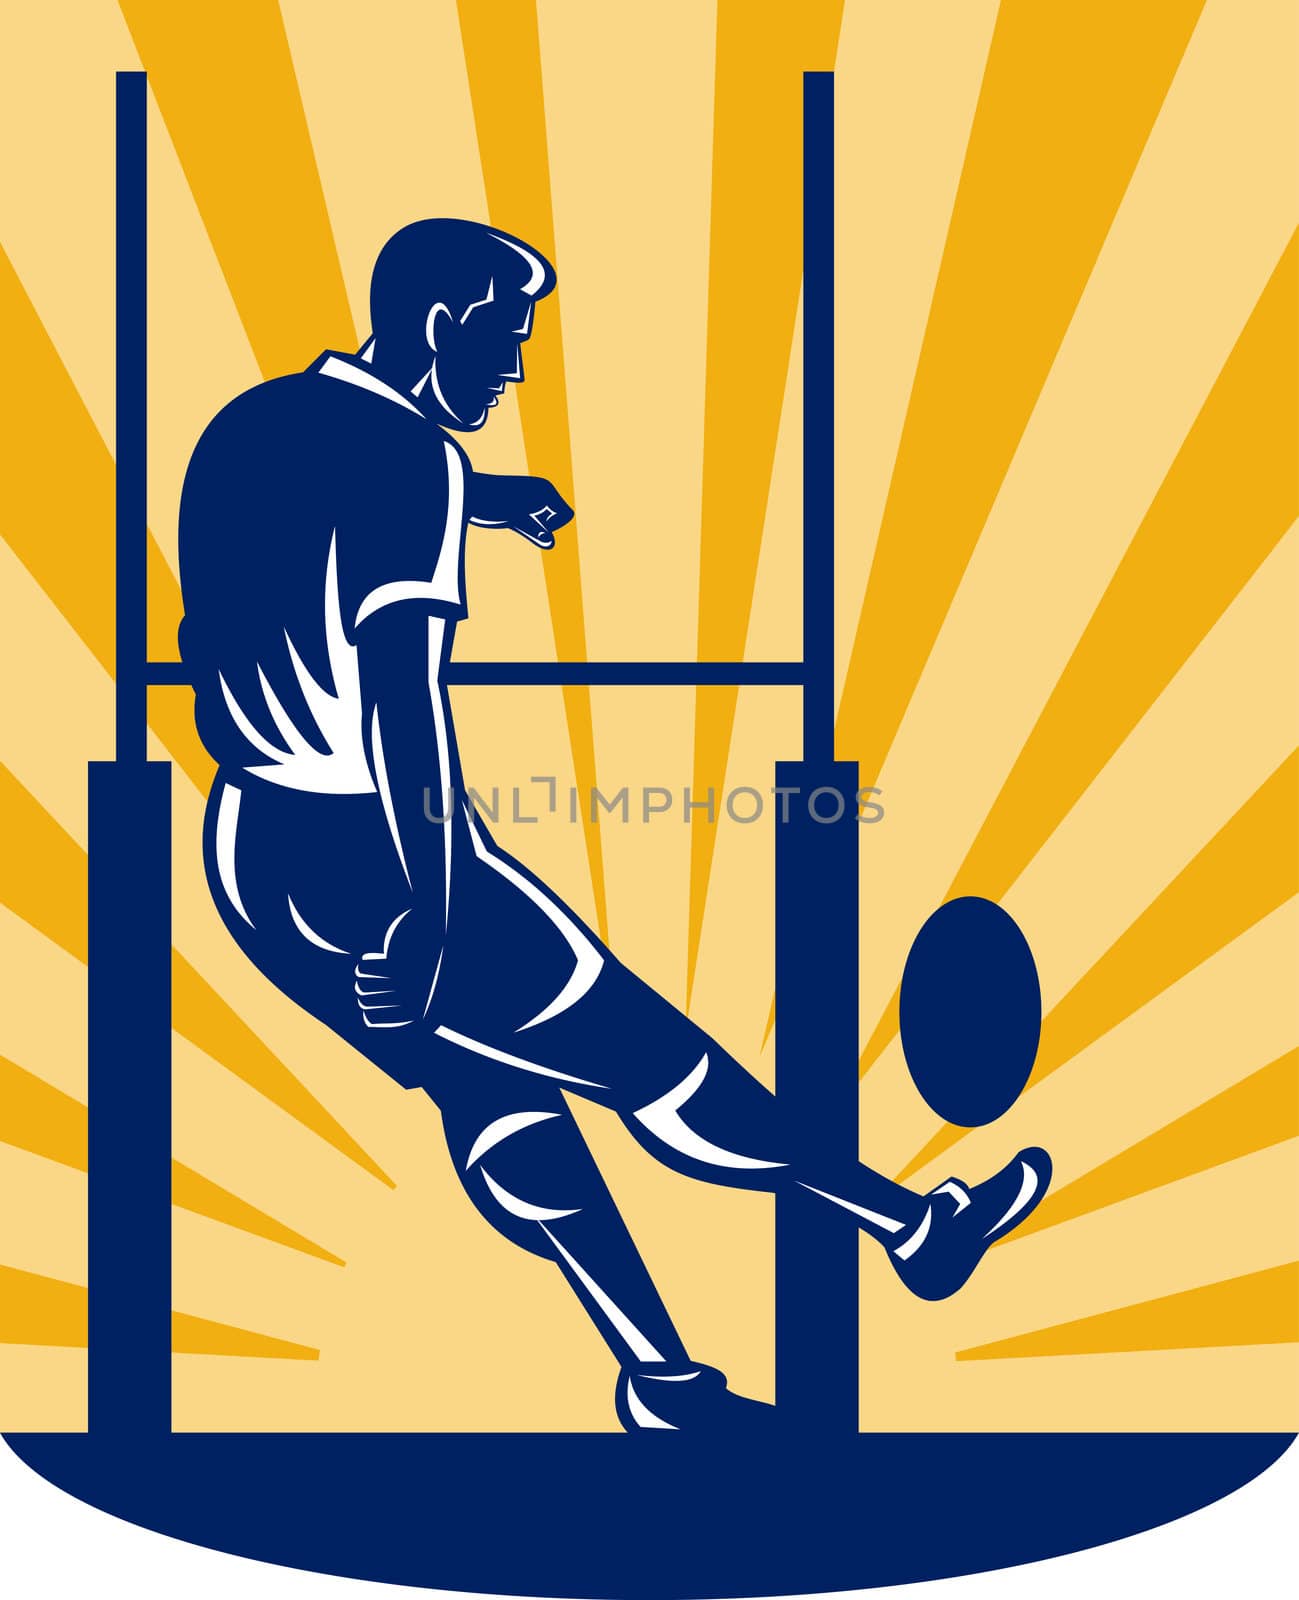 rugby player kicking at goal post by patrimonio